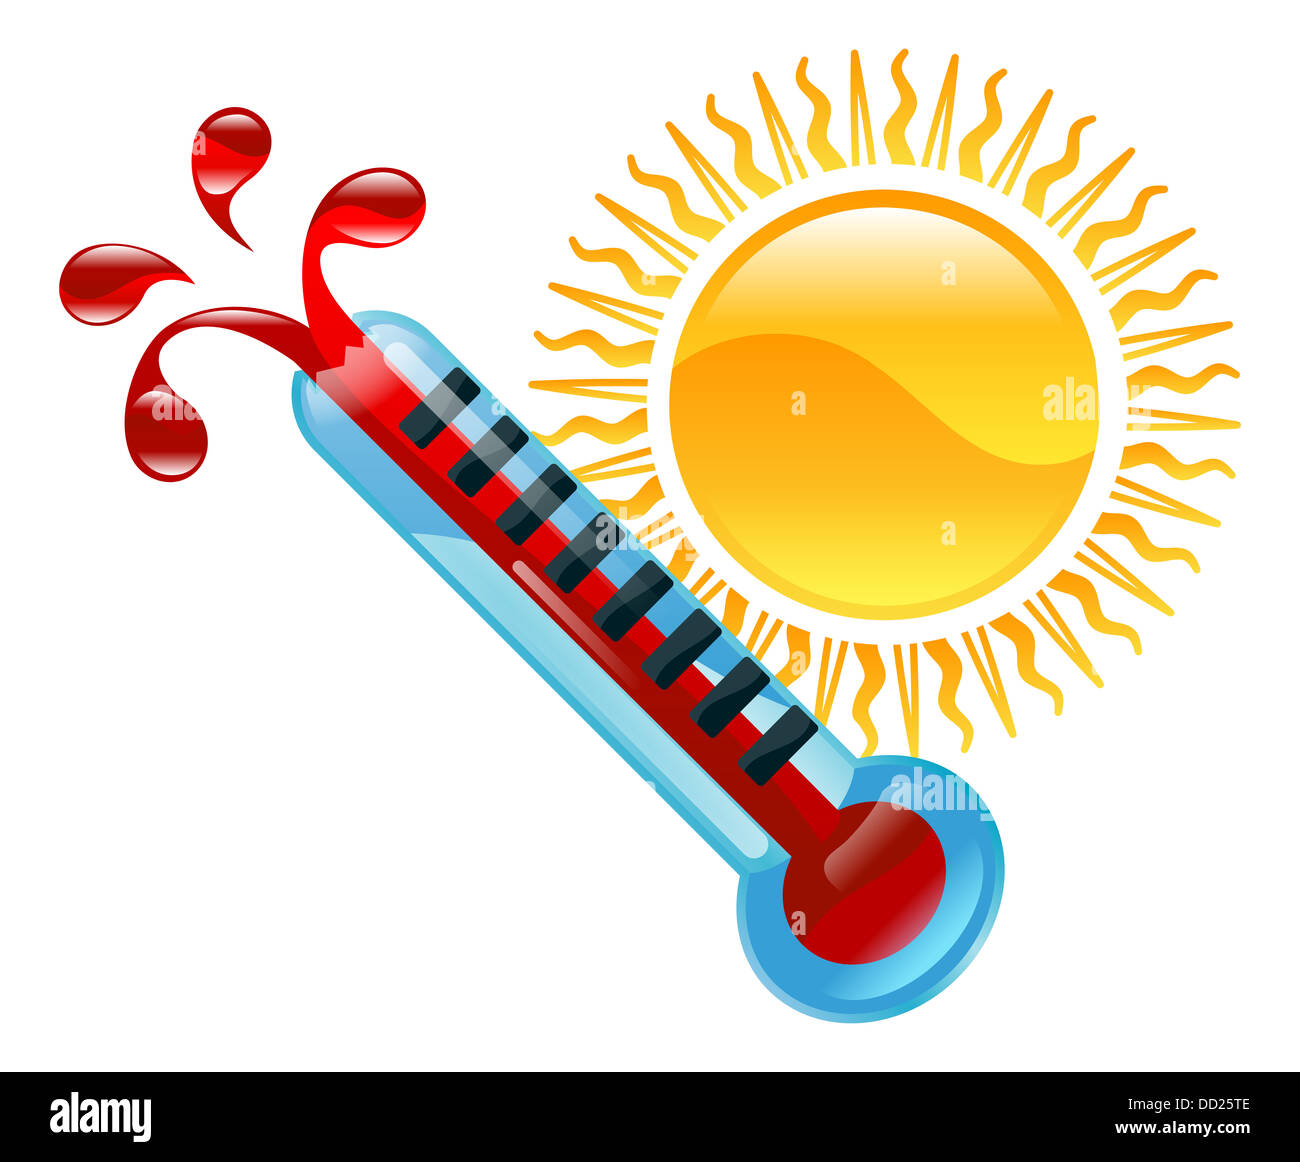 Weather icon clipart boiling hot thermometer illustration Stock Photo